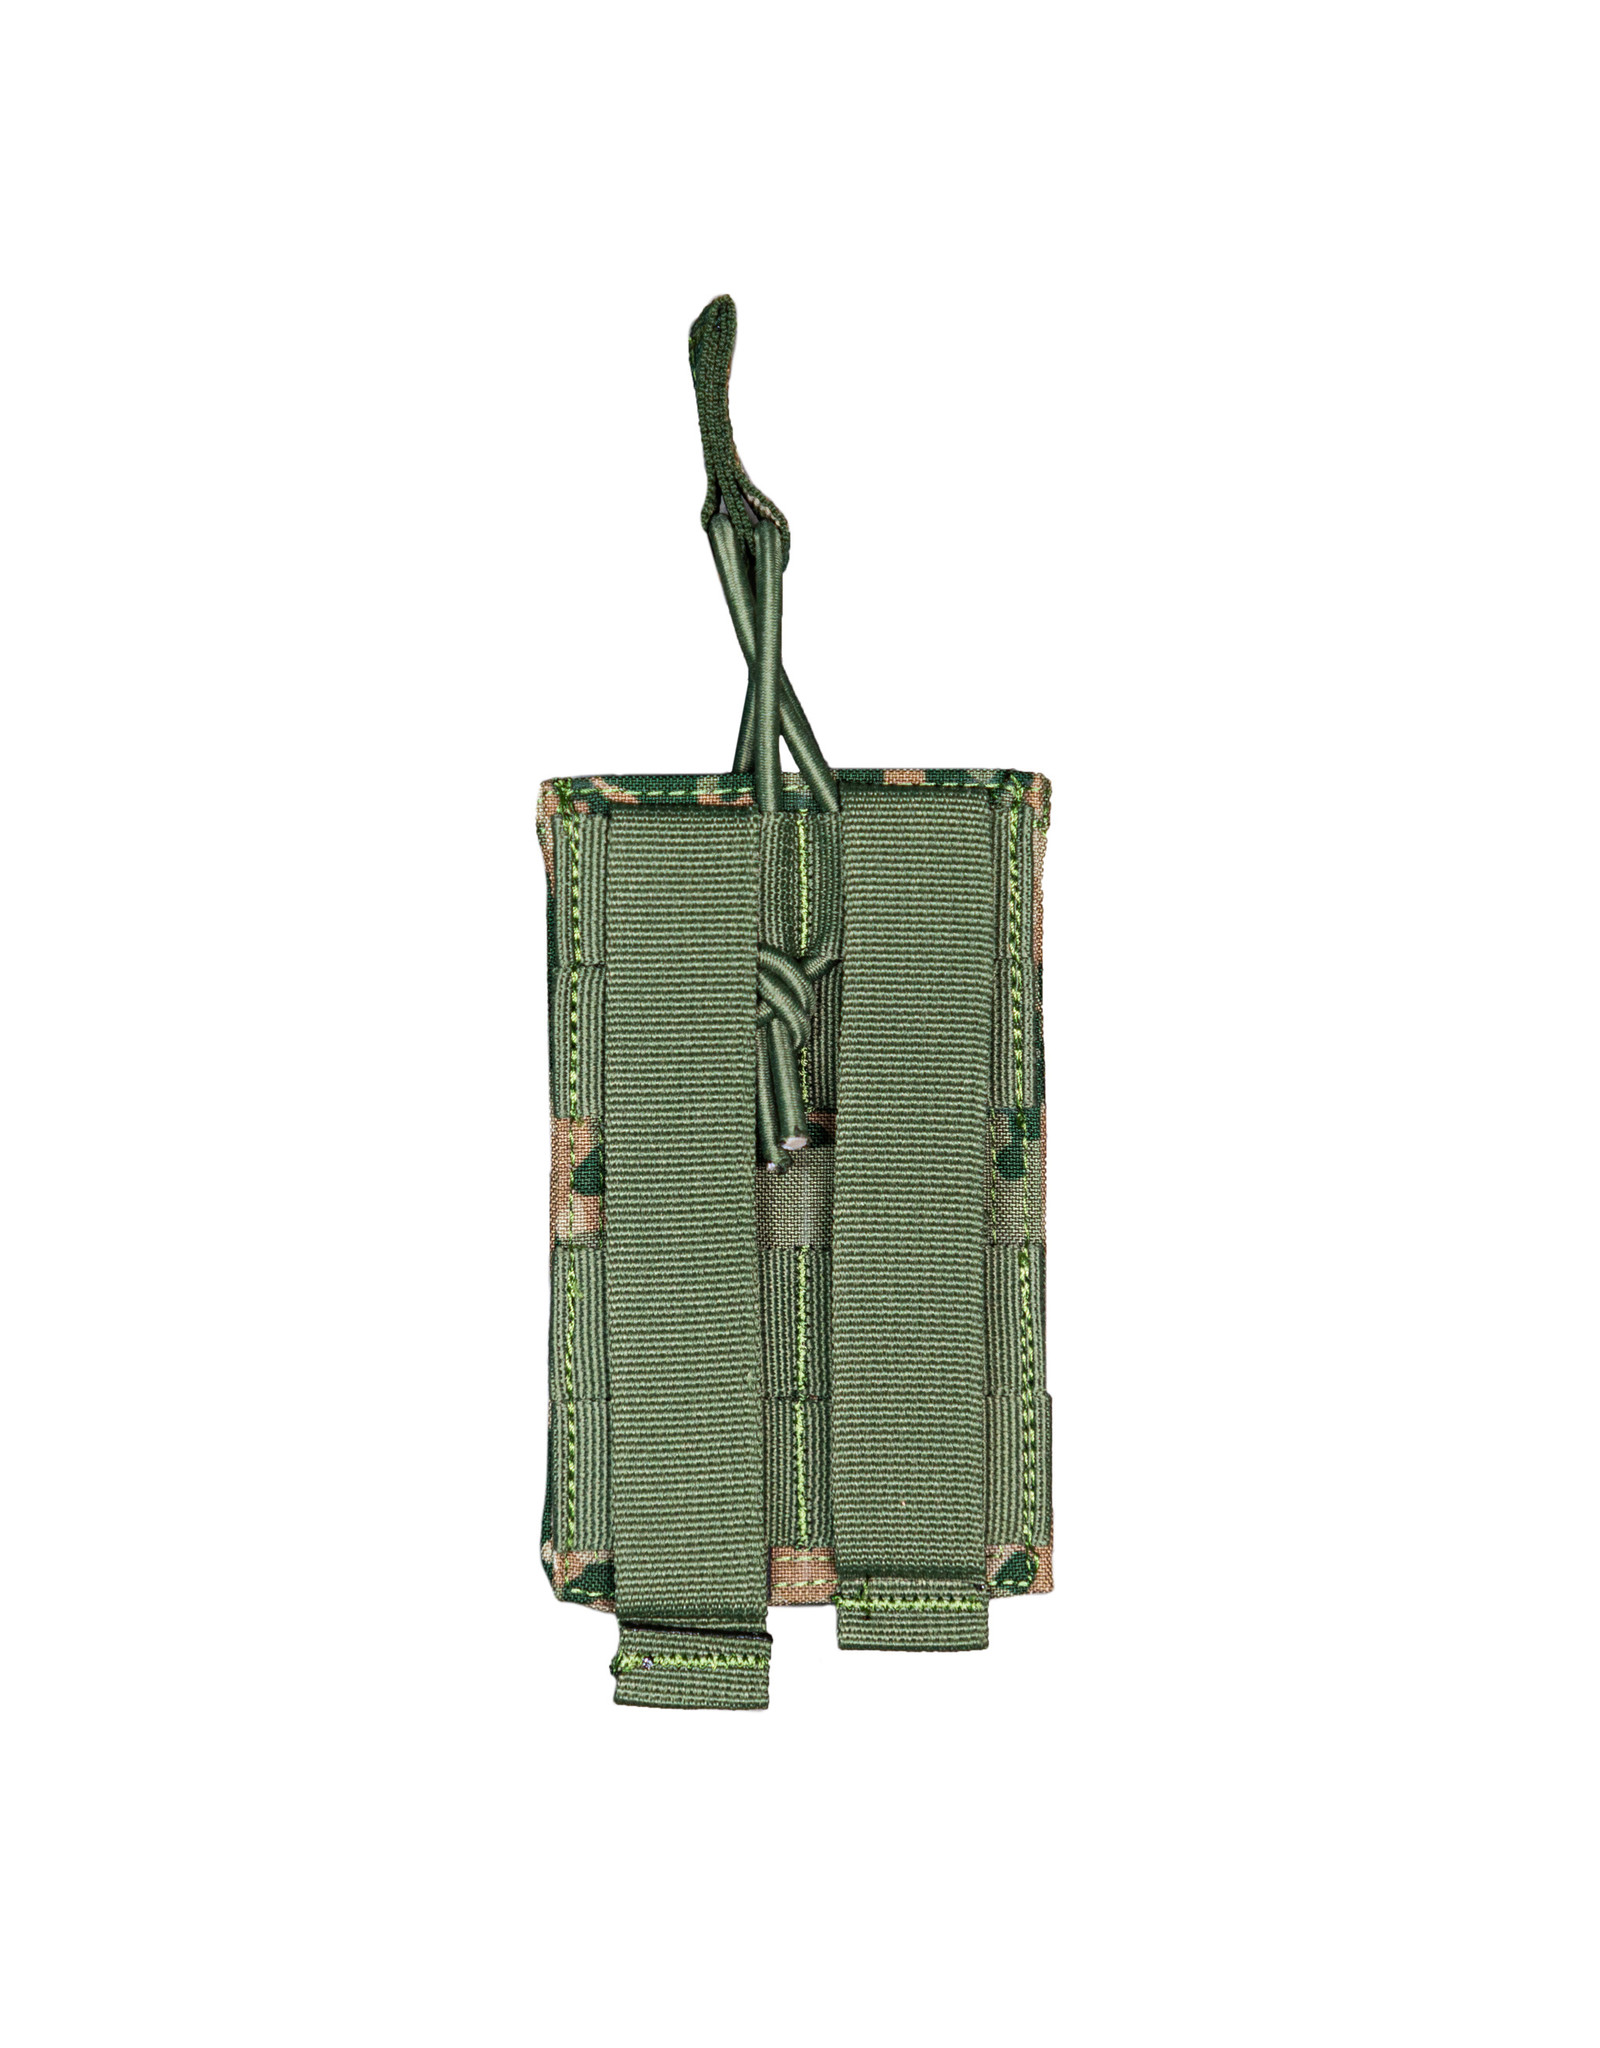 Dutch Tactical Gear Single Molle Open Mag Pouch 5.56 - NFP